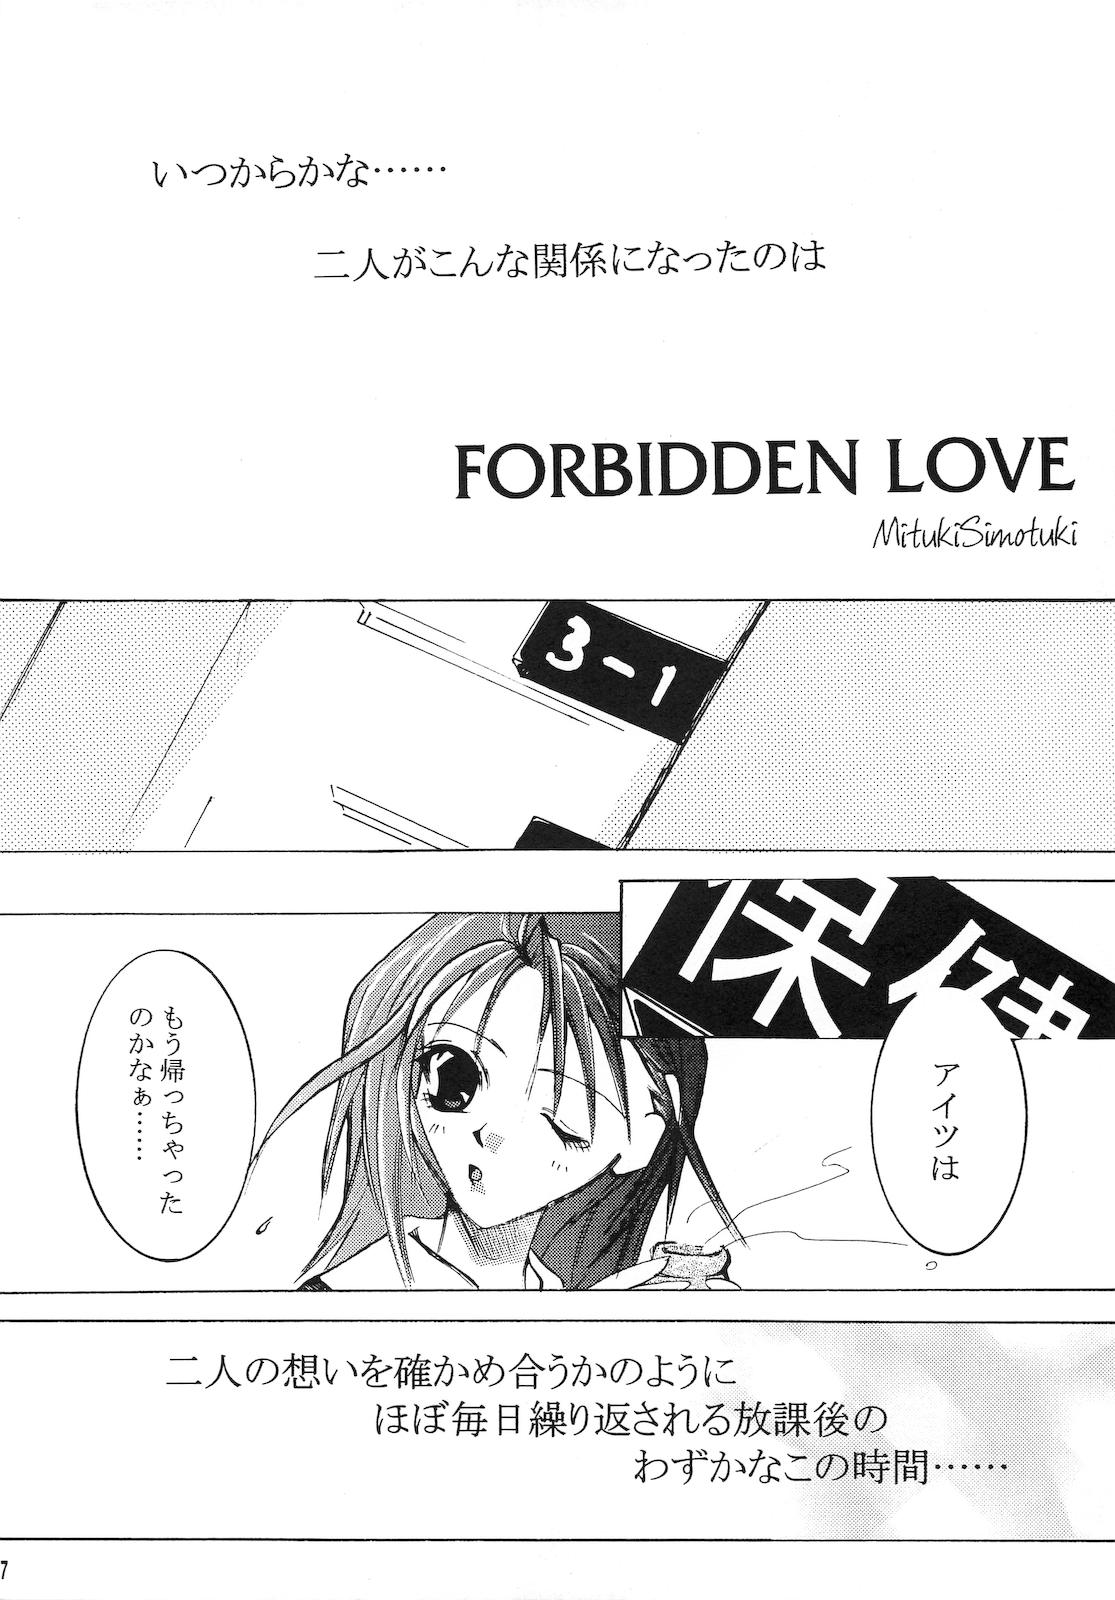 Hot Girl Forbidden Love - With you Moneytalks - Page 6